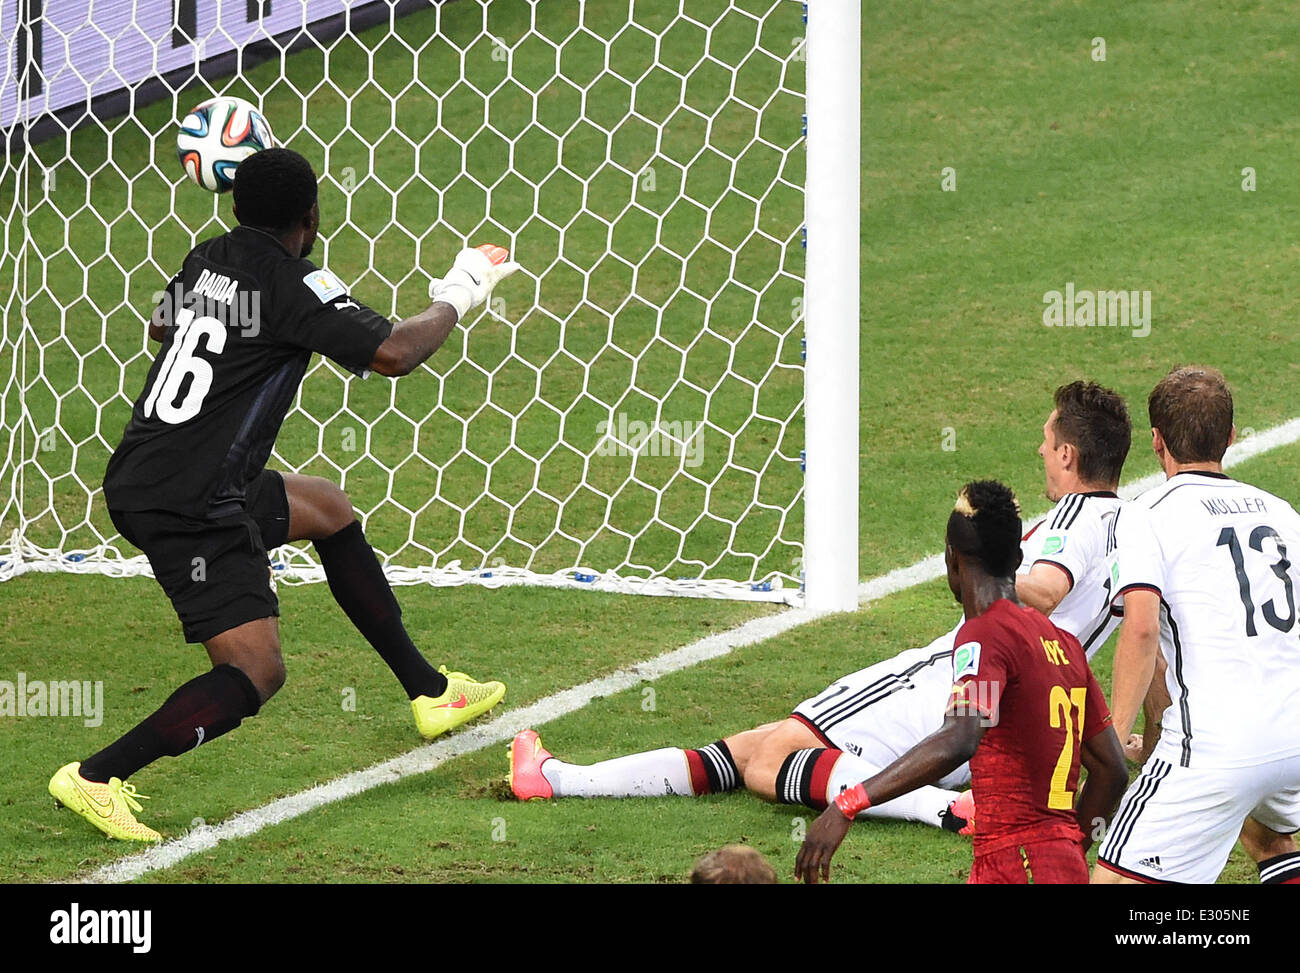 Fortaleza, Brazil. 21st June, 2014. Germany's Miroslav Klose scores the 2-2 against Ghana's goal keeper Fatawu Dauda (L) during the FIFA World Cup 2014 group G preliminary round match between Germany and Ghana at the Estadio Castelao Stadium in Fortaleza, Brazil, 21 June 2014. Photo: Marcus Brandt/dpa/Alamy Live News Stock Photo